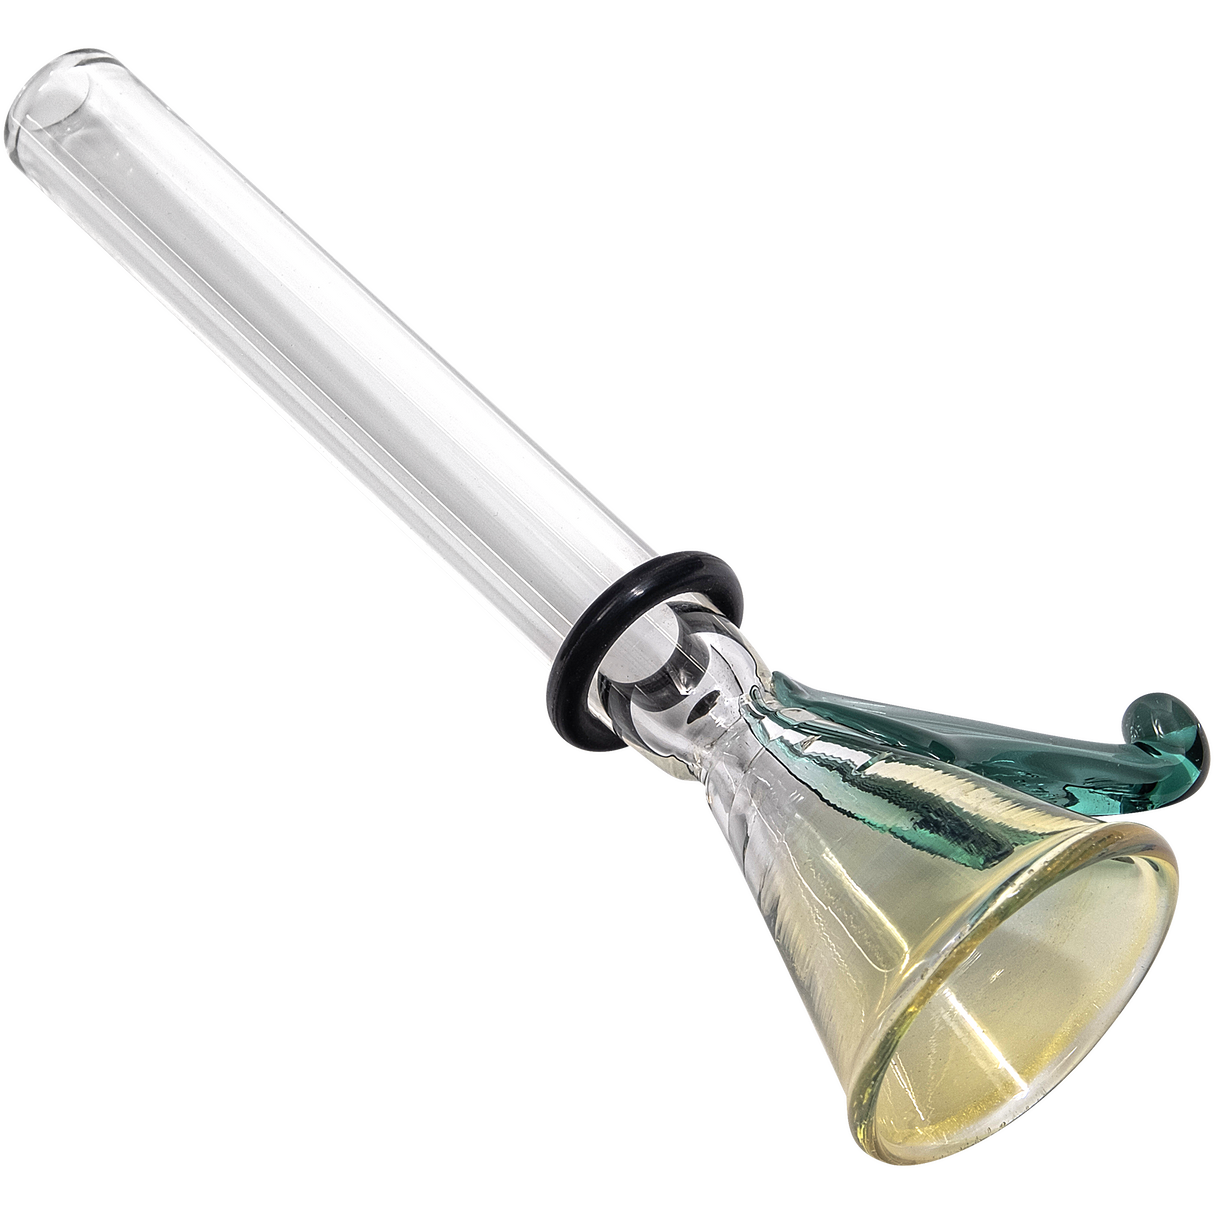 LA Pipes 9mm Funnel Slide Bowl with Handle for Bongs, Clear Borosilicate Glass, Side View